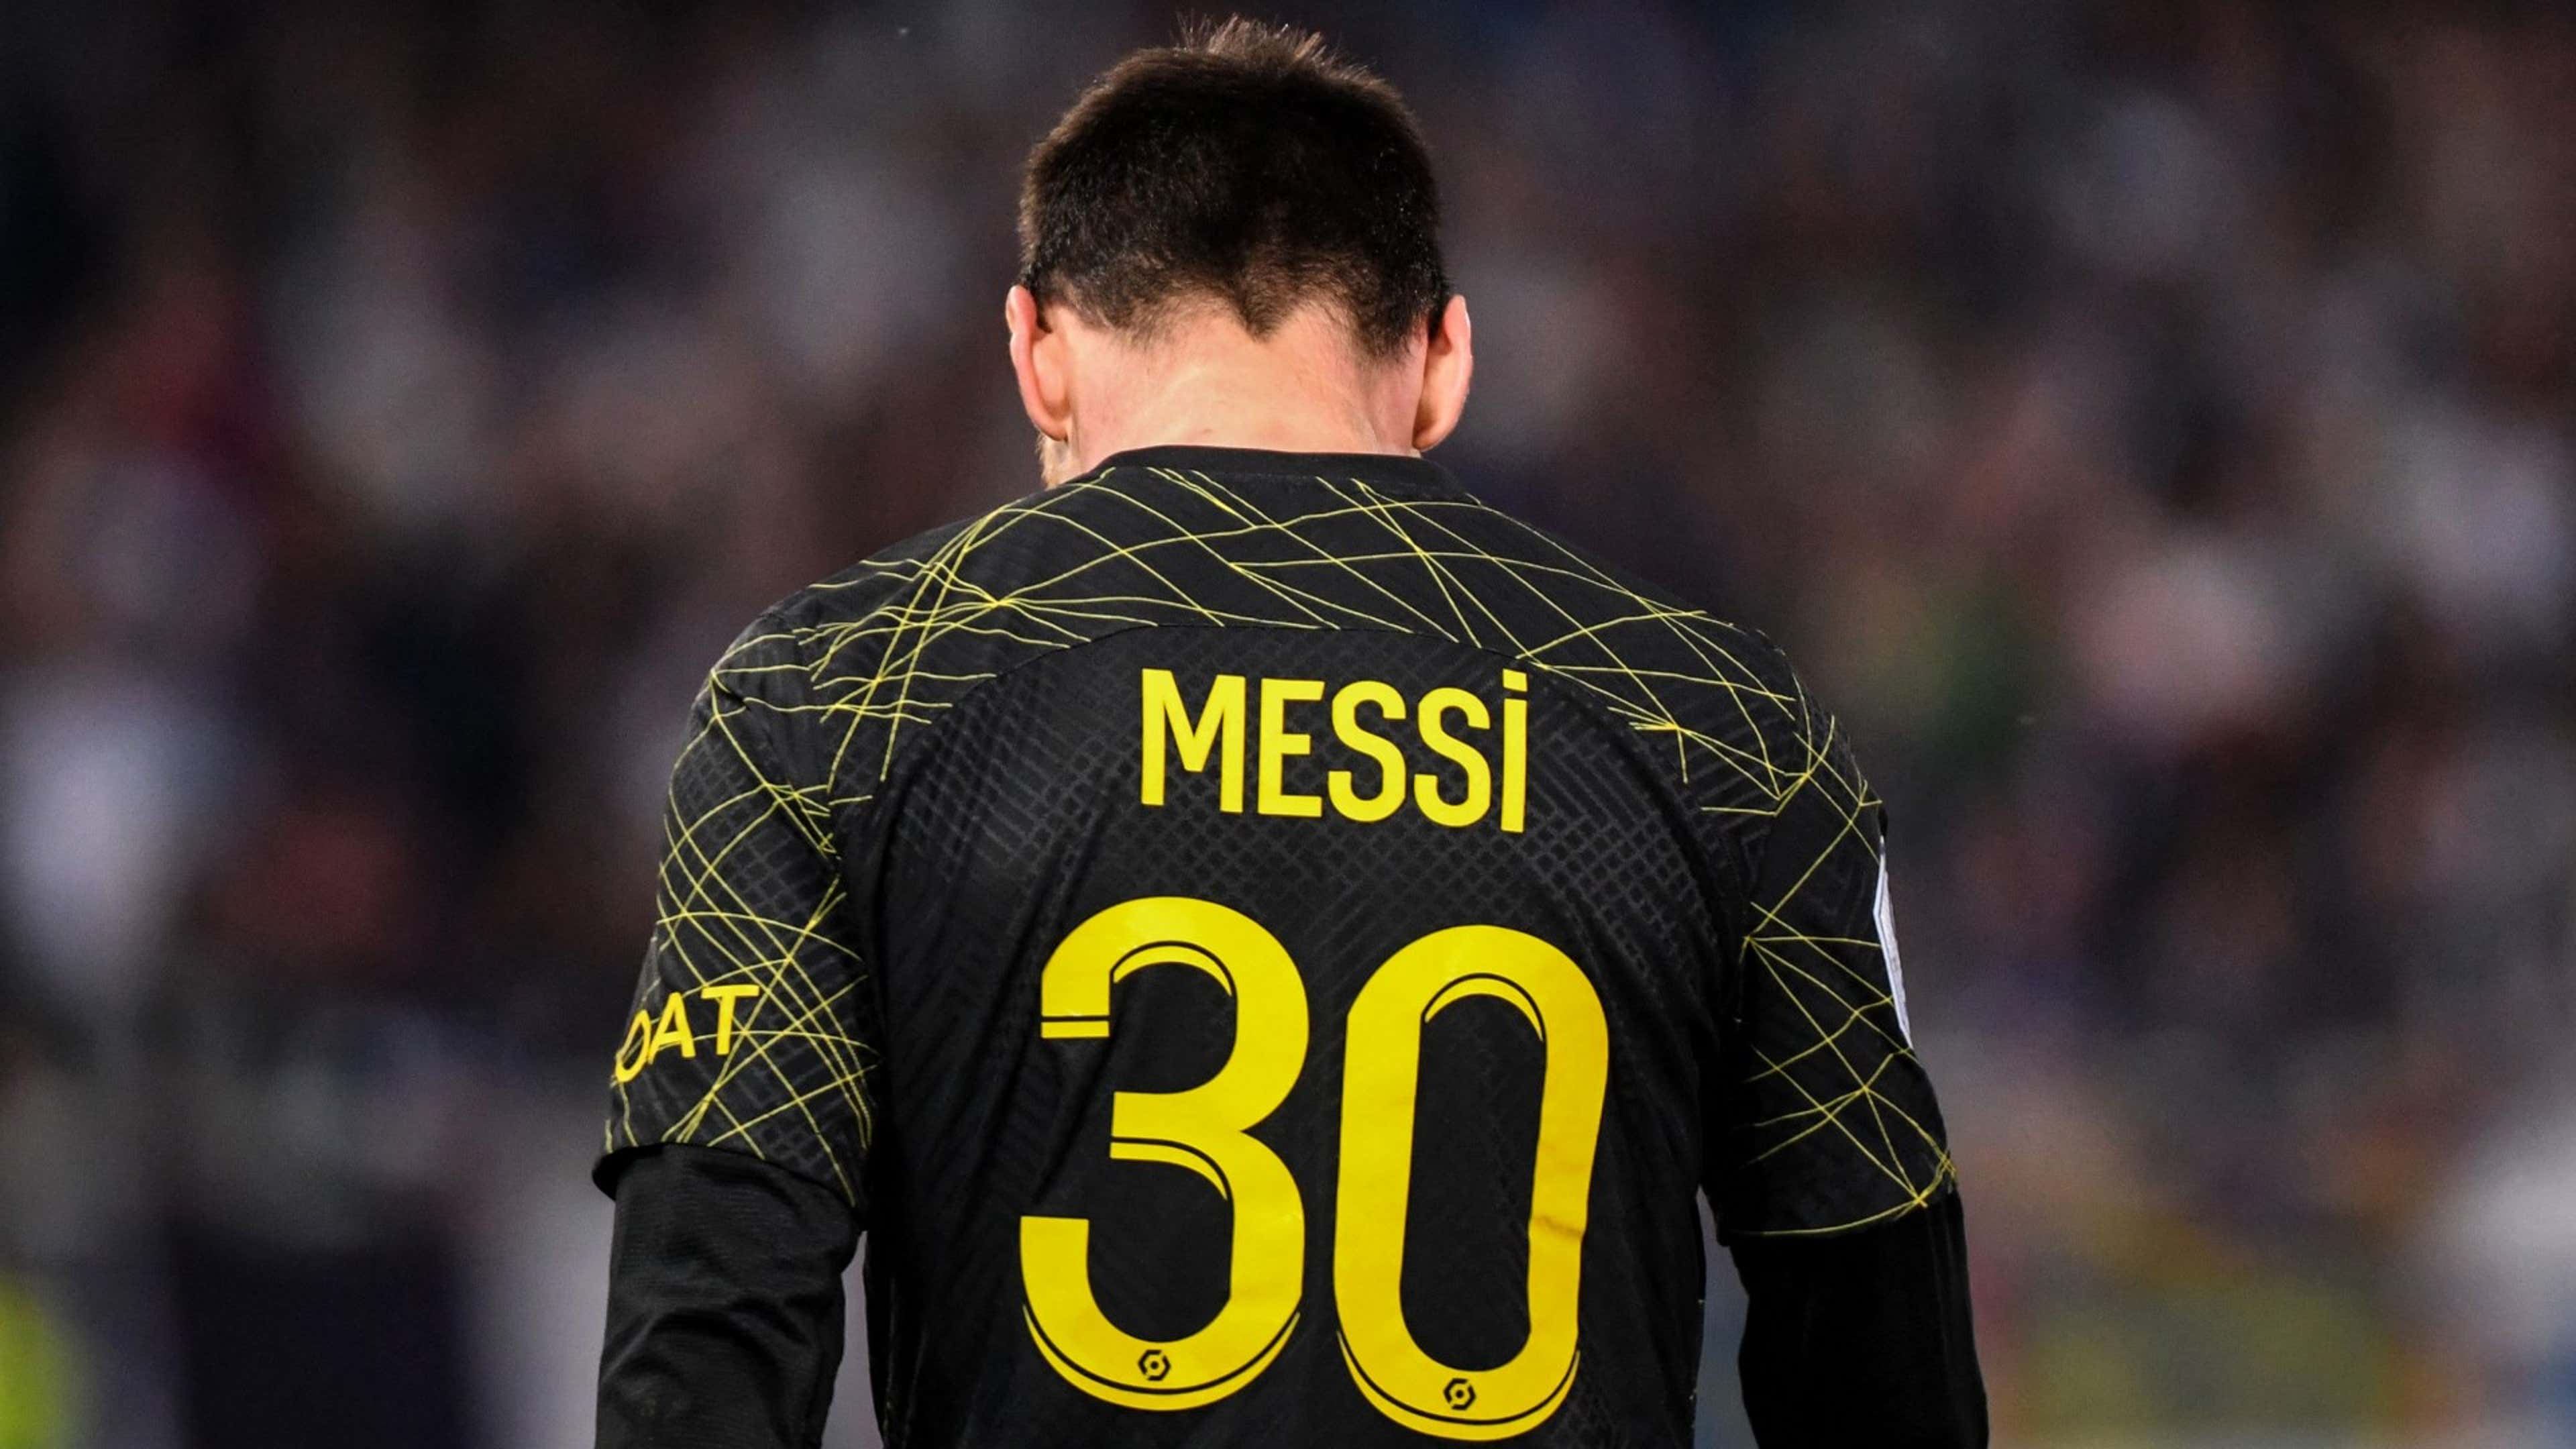 PSG new kit: What Messi & Mbappe will wear in 2022-23 as Ligue 1